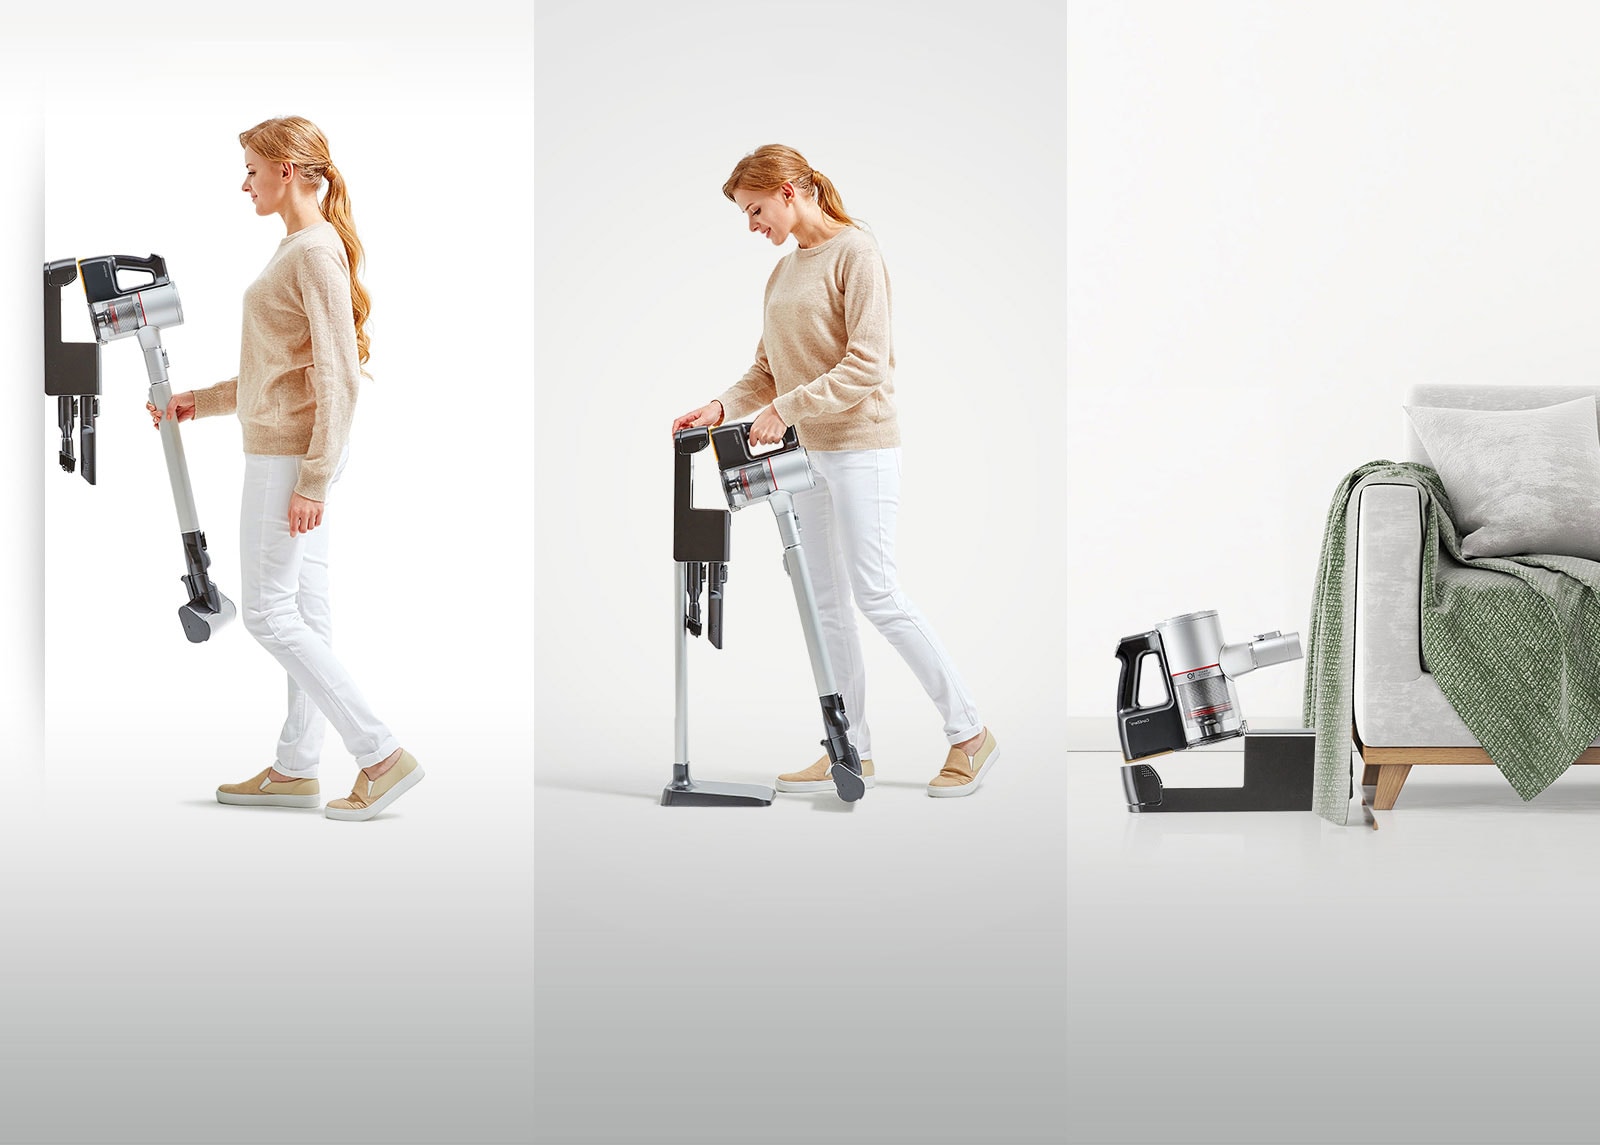 3 images of woman detaching, storing and charging LG CordZero™ A9 Stick Vacuum